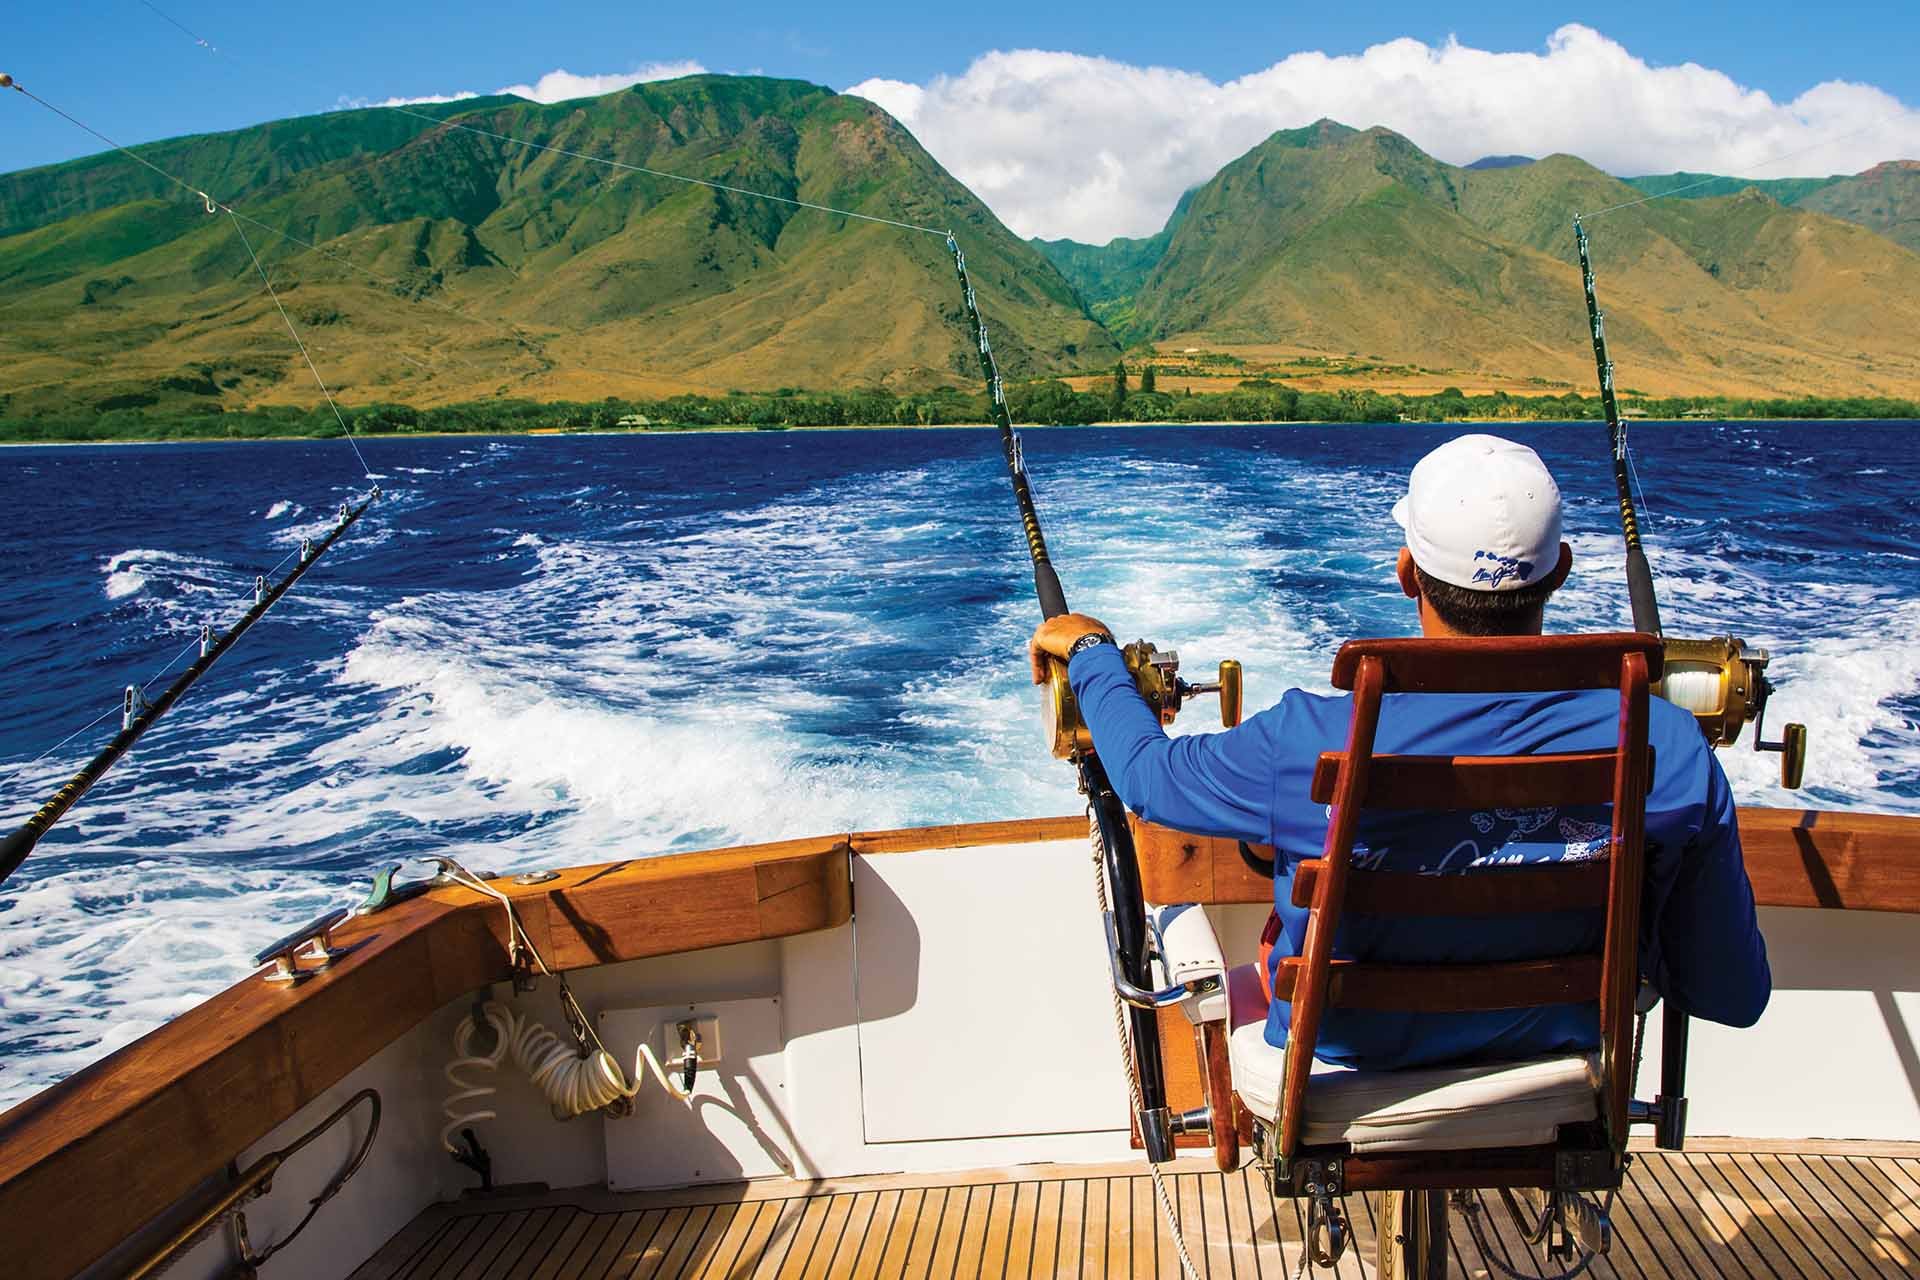 Man on a boat deep sea fishing, grass-covered mountains in distance